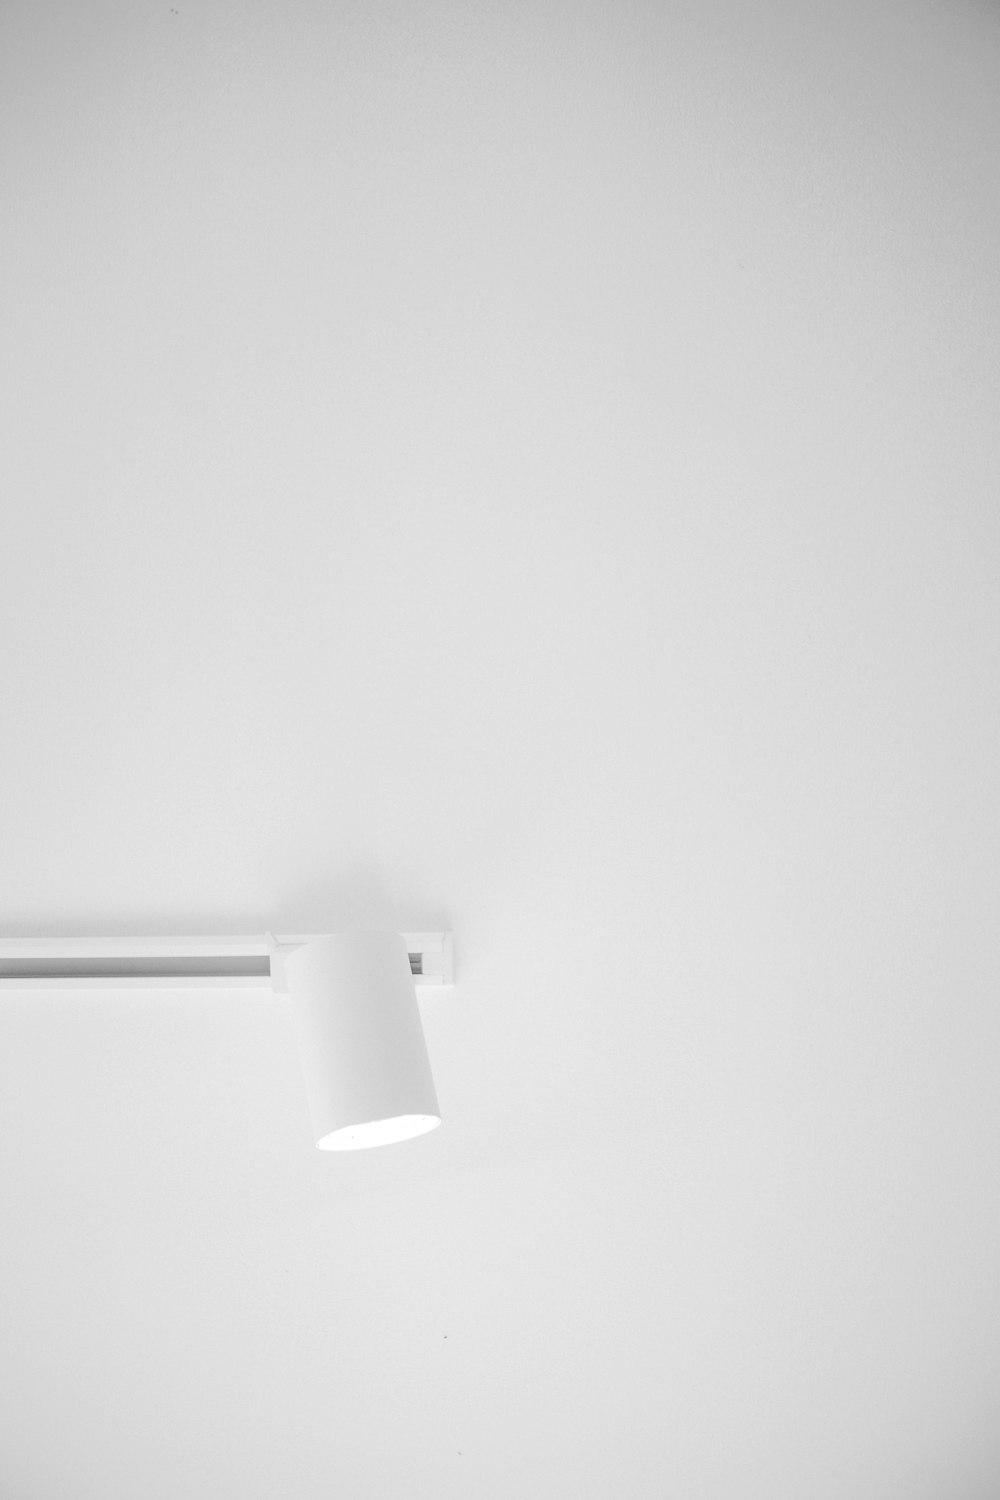 a black and white photo of a ceiling light